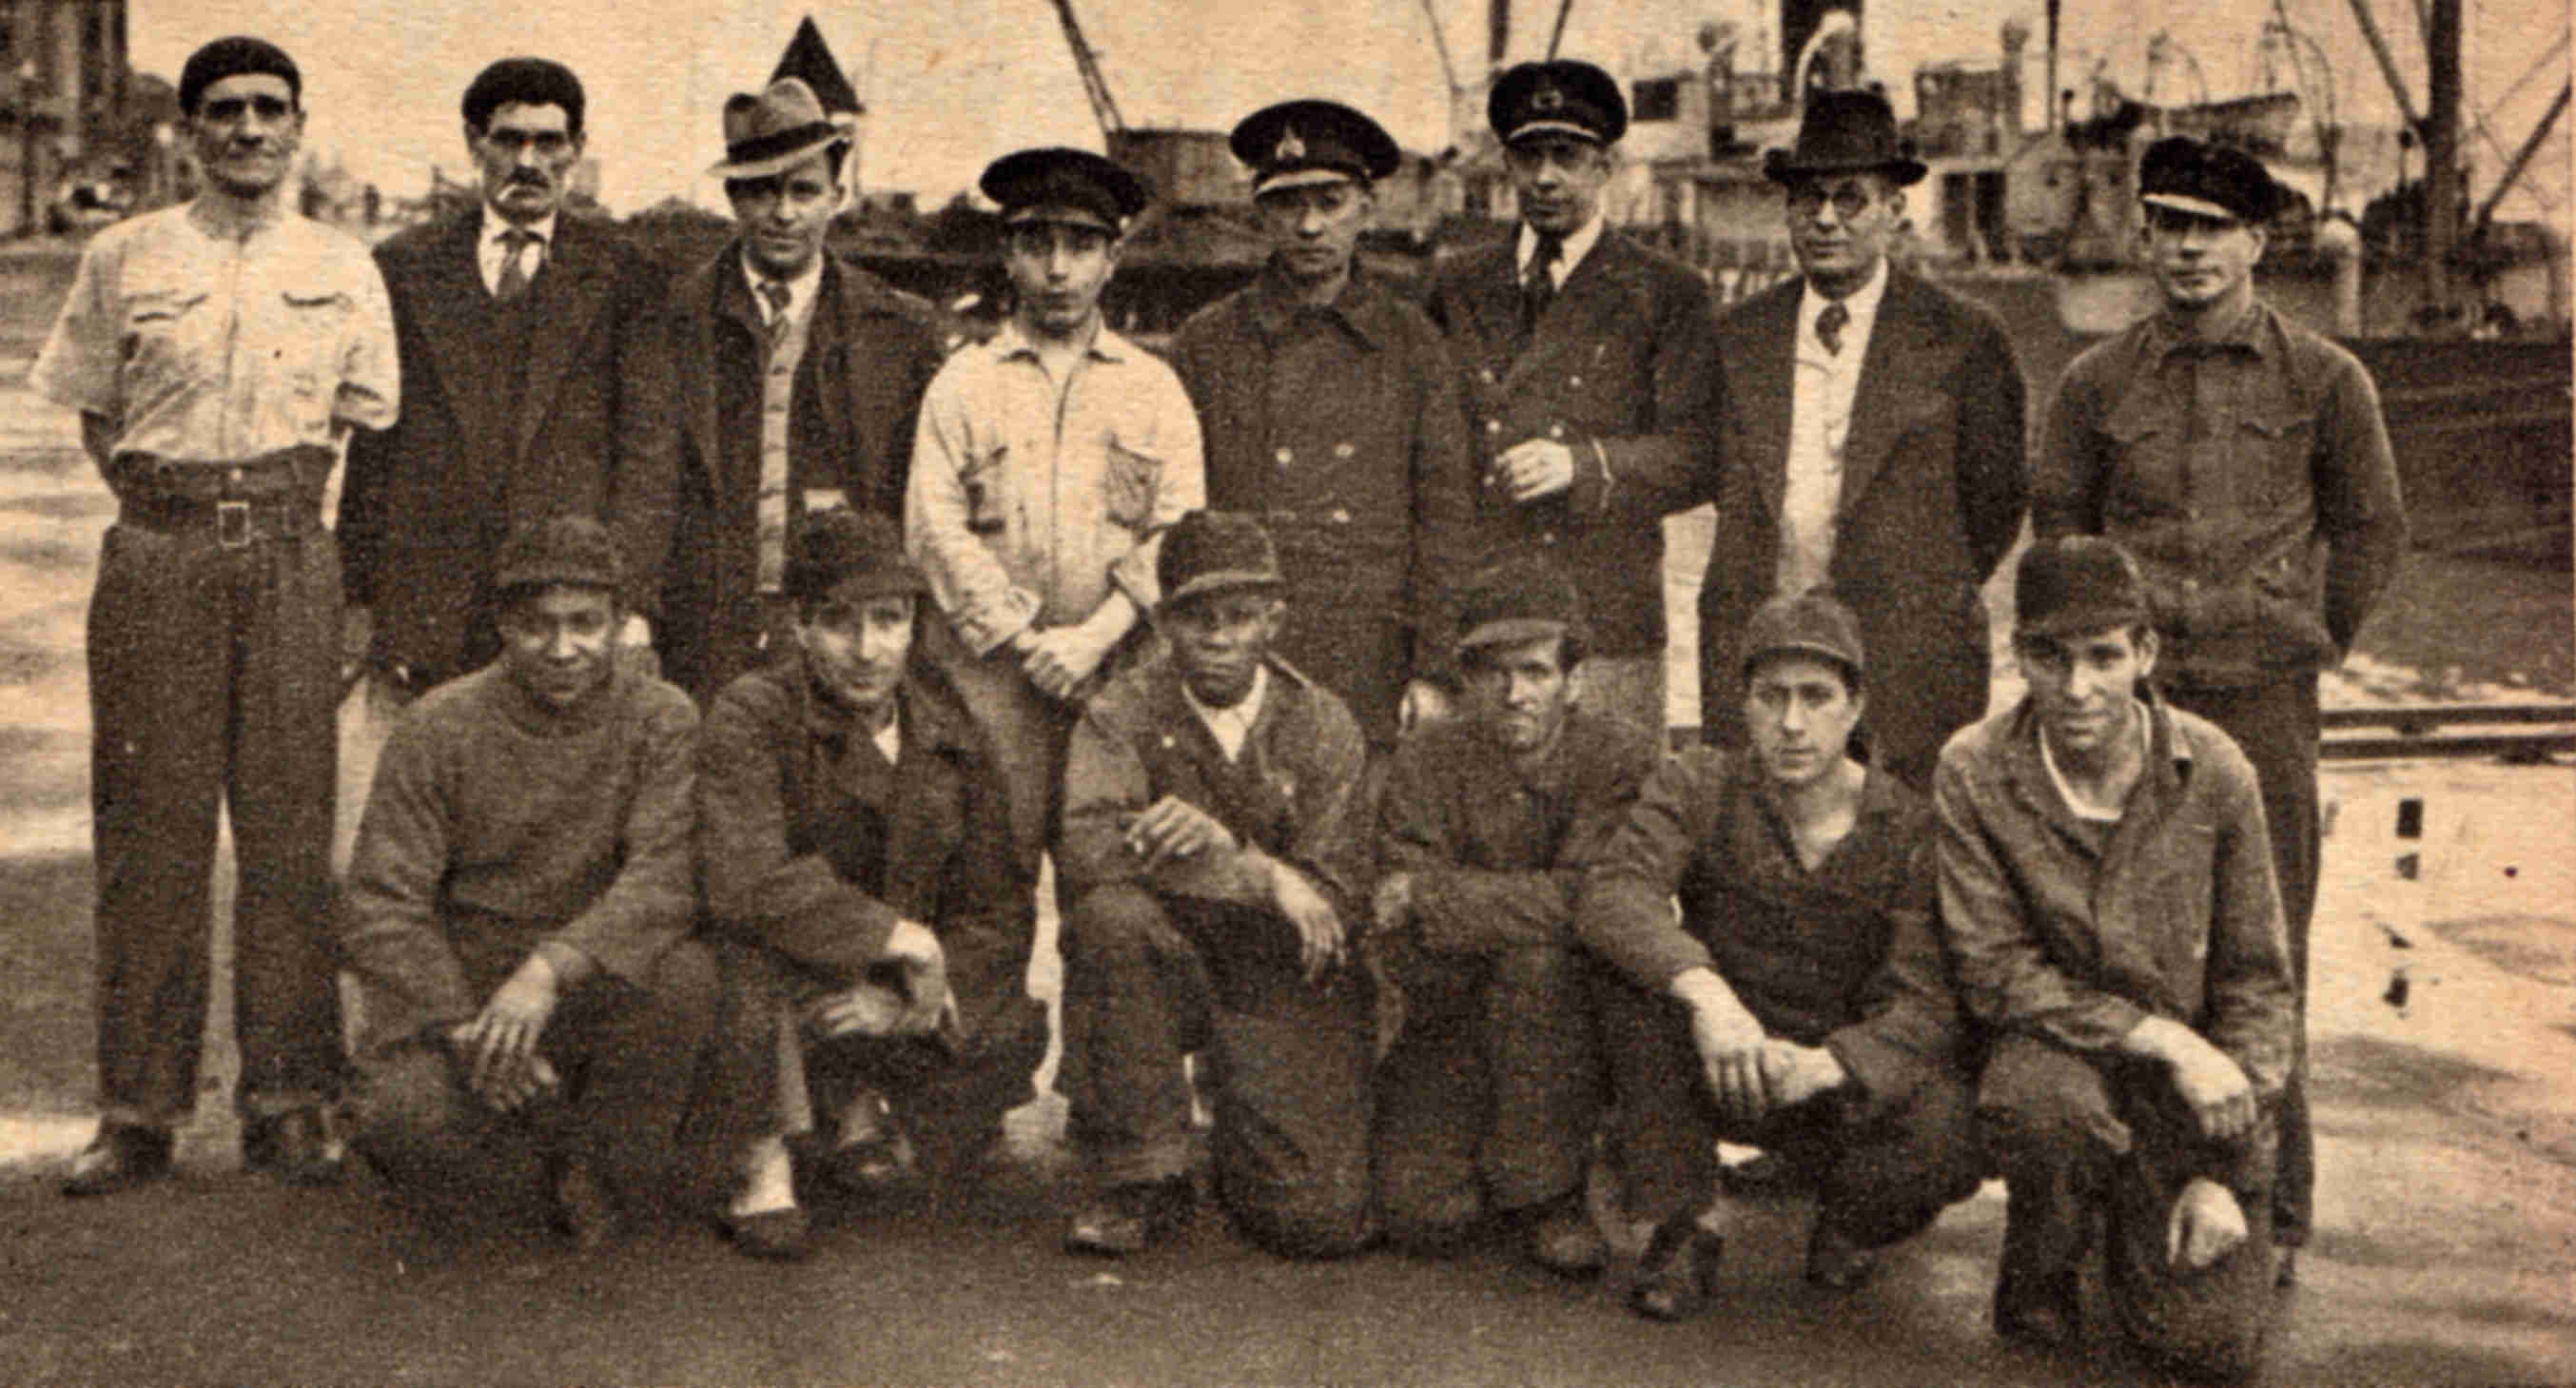 Crew from the Portuguese Sines, who rescued the men from the Keystone